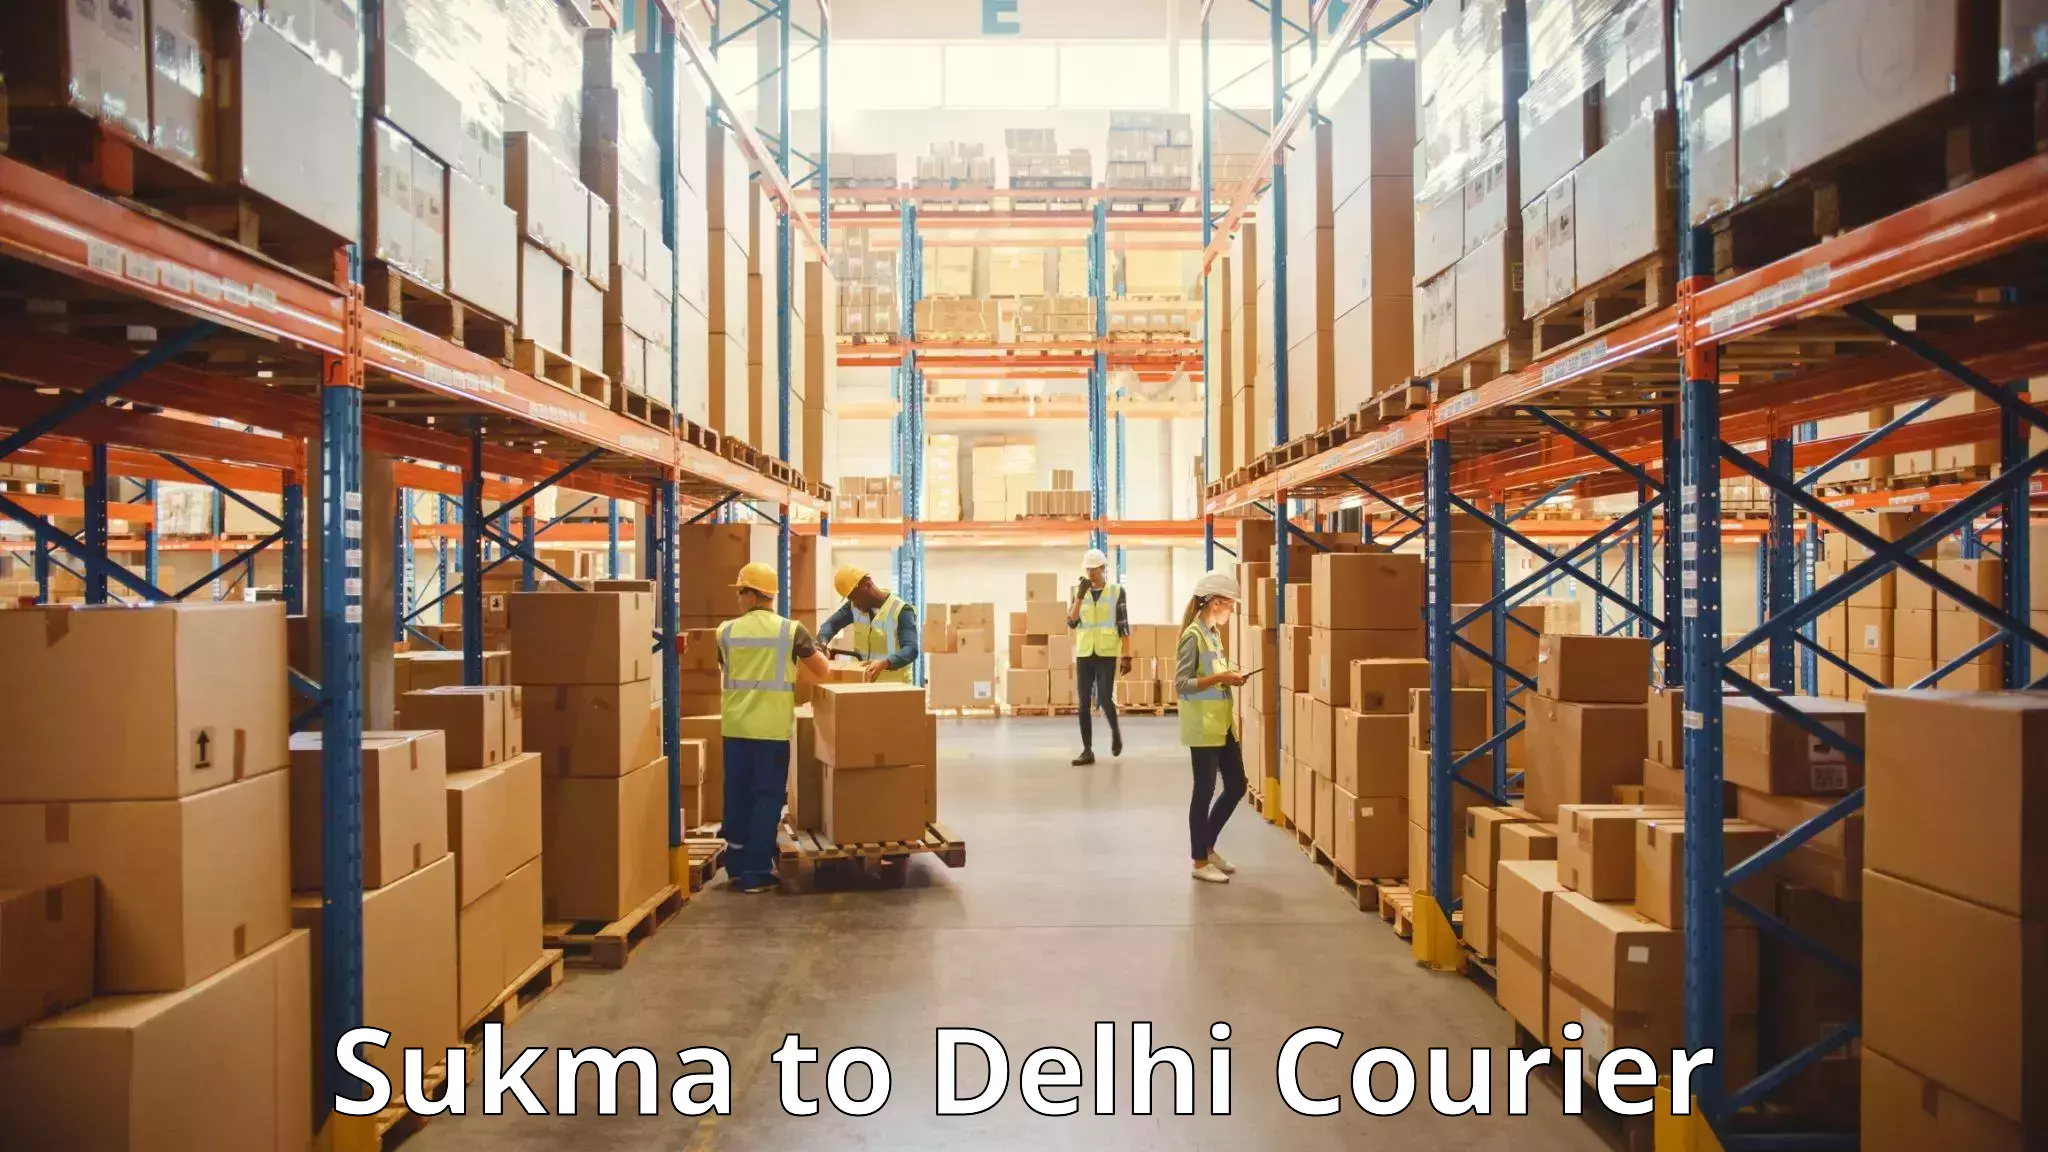 Baggage transport network Sukma to Lodhi Road